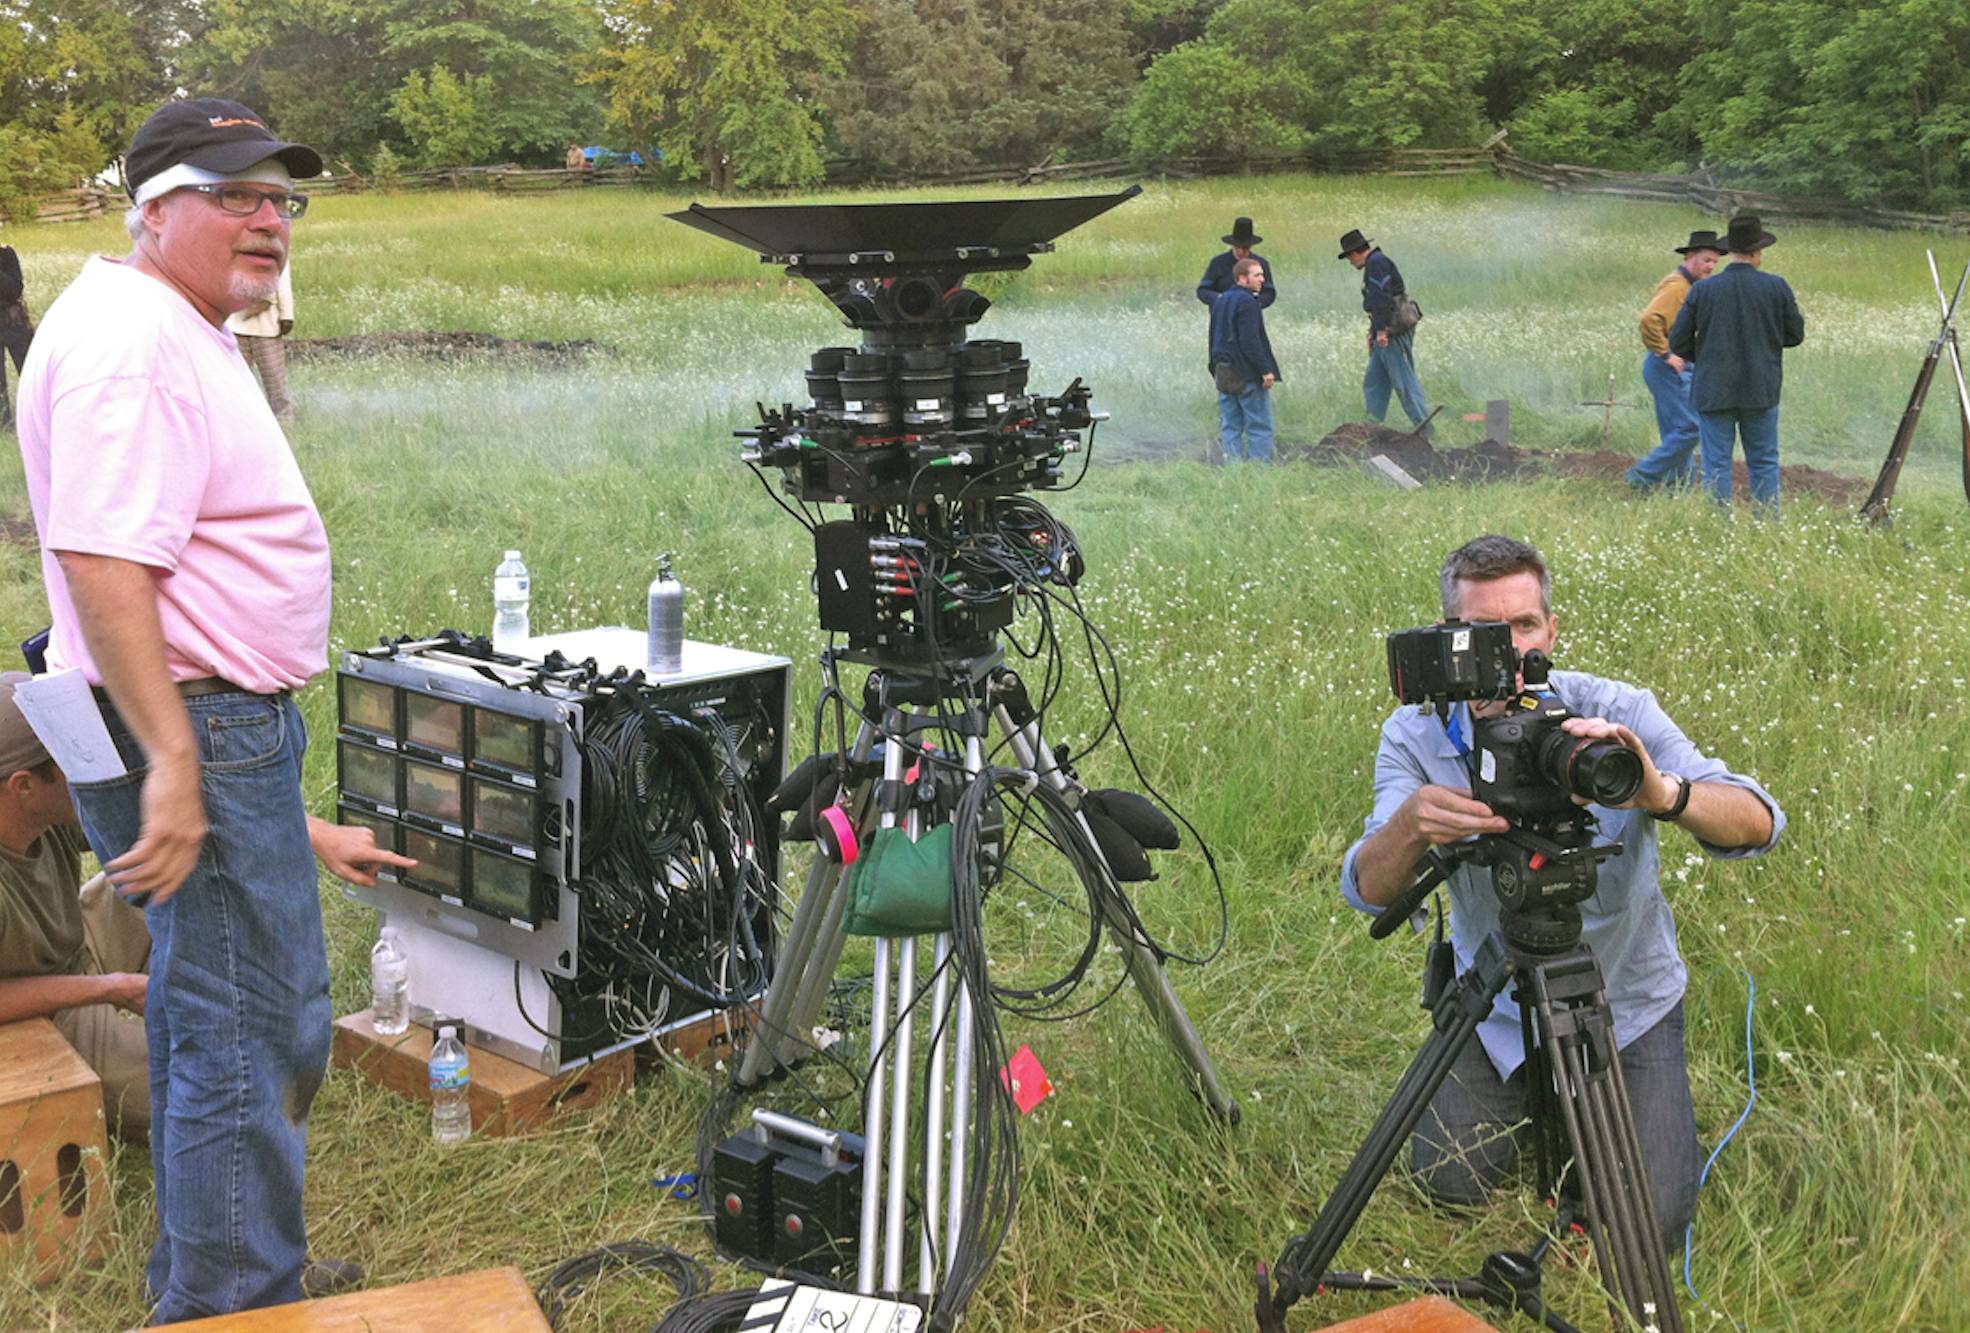 Video production team in the field with camera equipment and historical reenactment actors